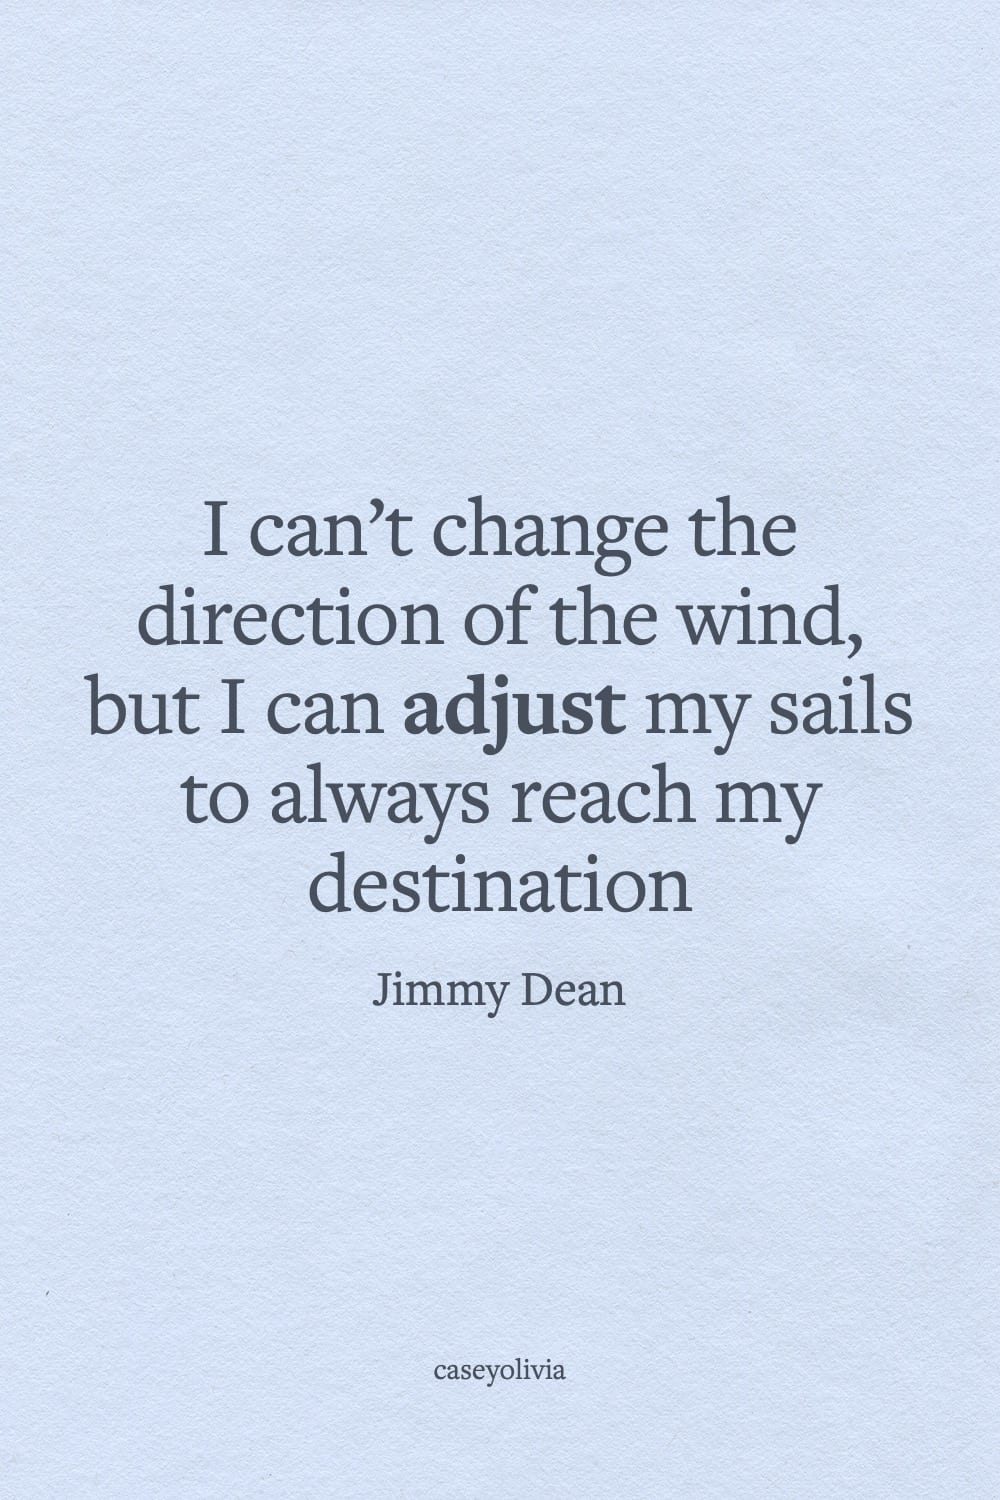 jimmy dean change the way you think quote for inspiration